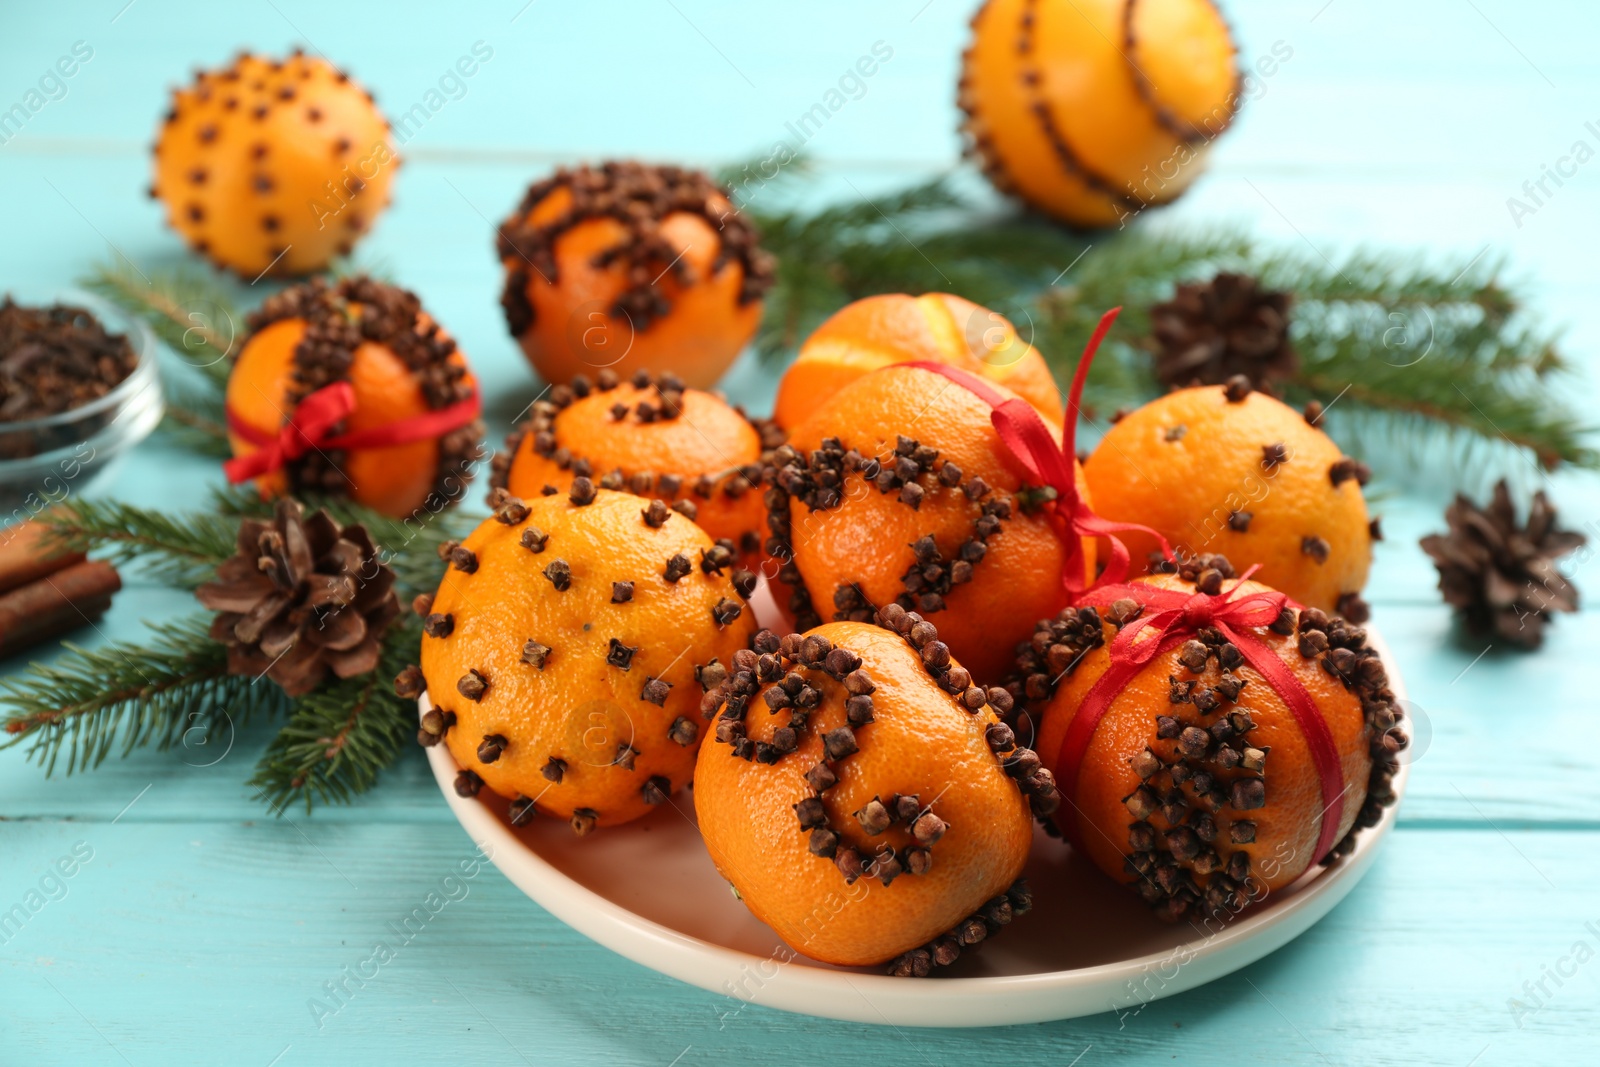 Photo of Pomander balls made of fresh tangerines and cloves on light blue wooden table